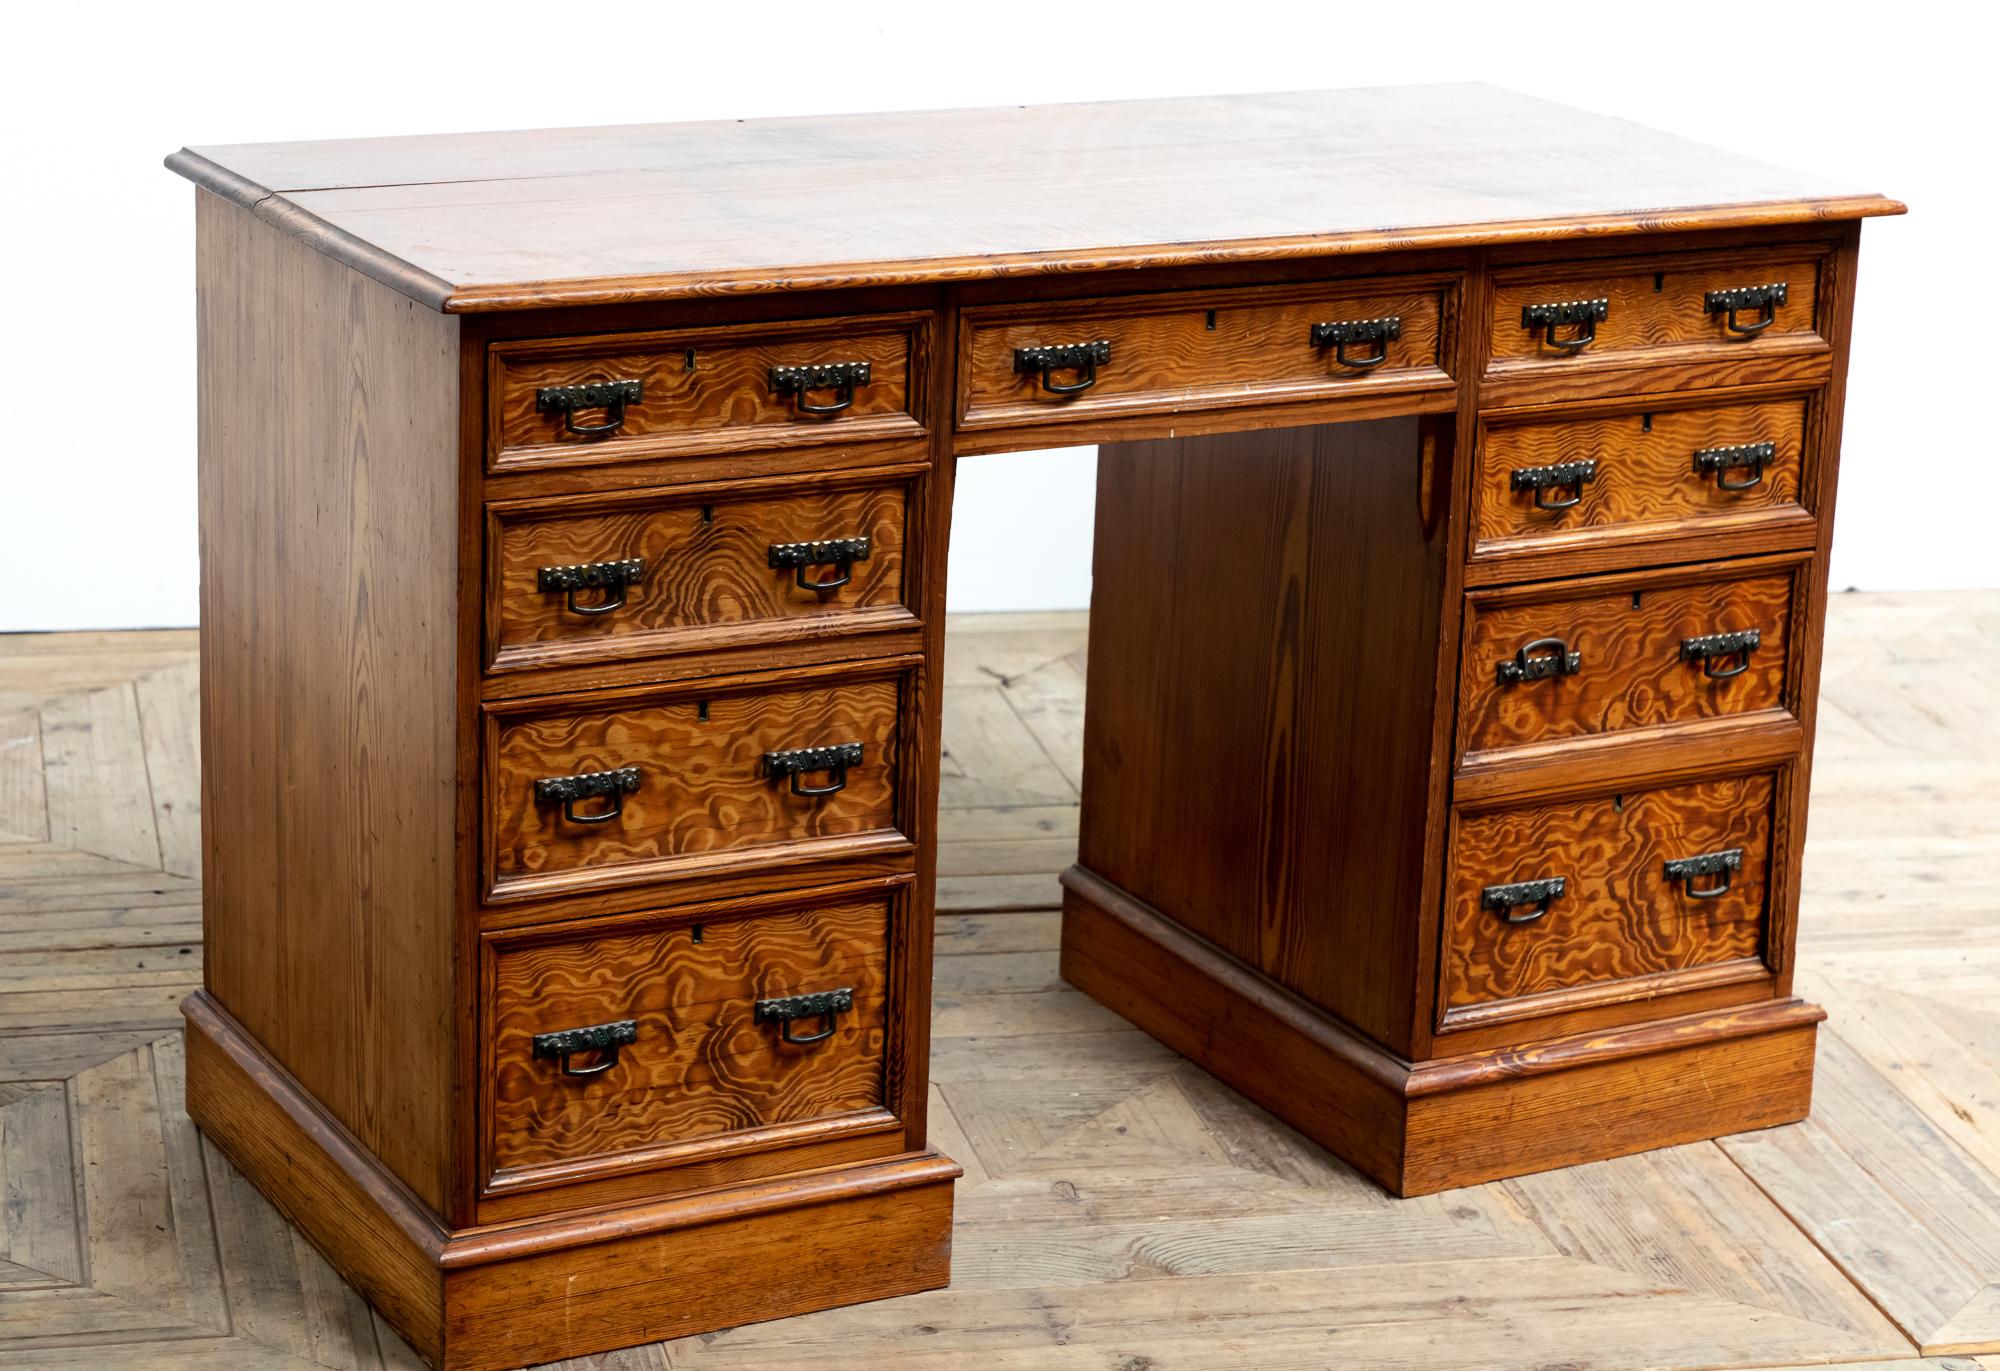 A striking 19th century pine twin pedestal desk. Constructed of Oregon Pine (Douglas Fir) the wood has a wonderful rich warm glow and striking grain. The desk is of traditional form, a two plank top that stands on two pedestals lined with graduated